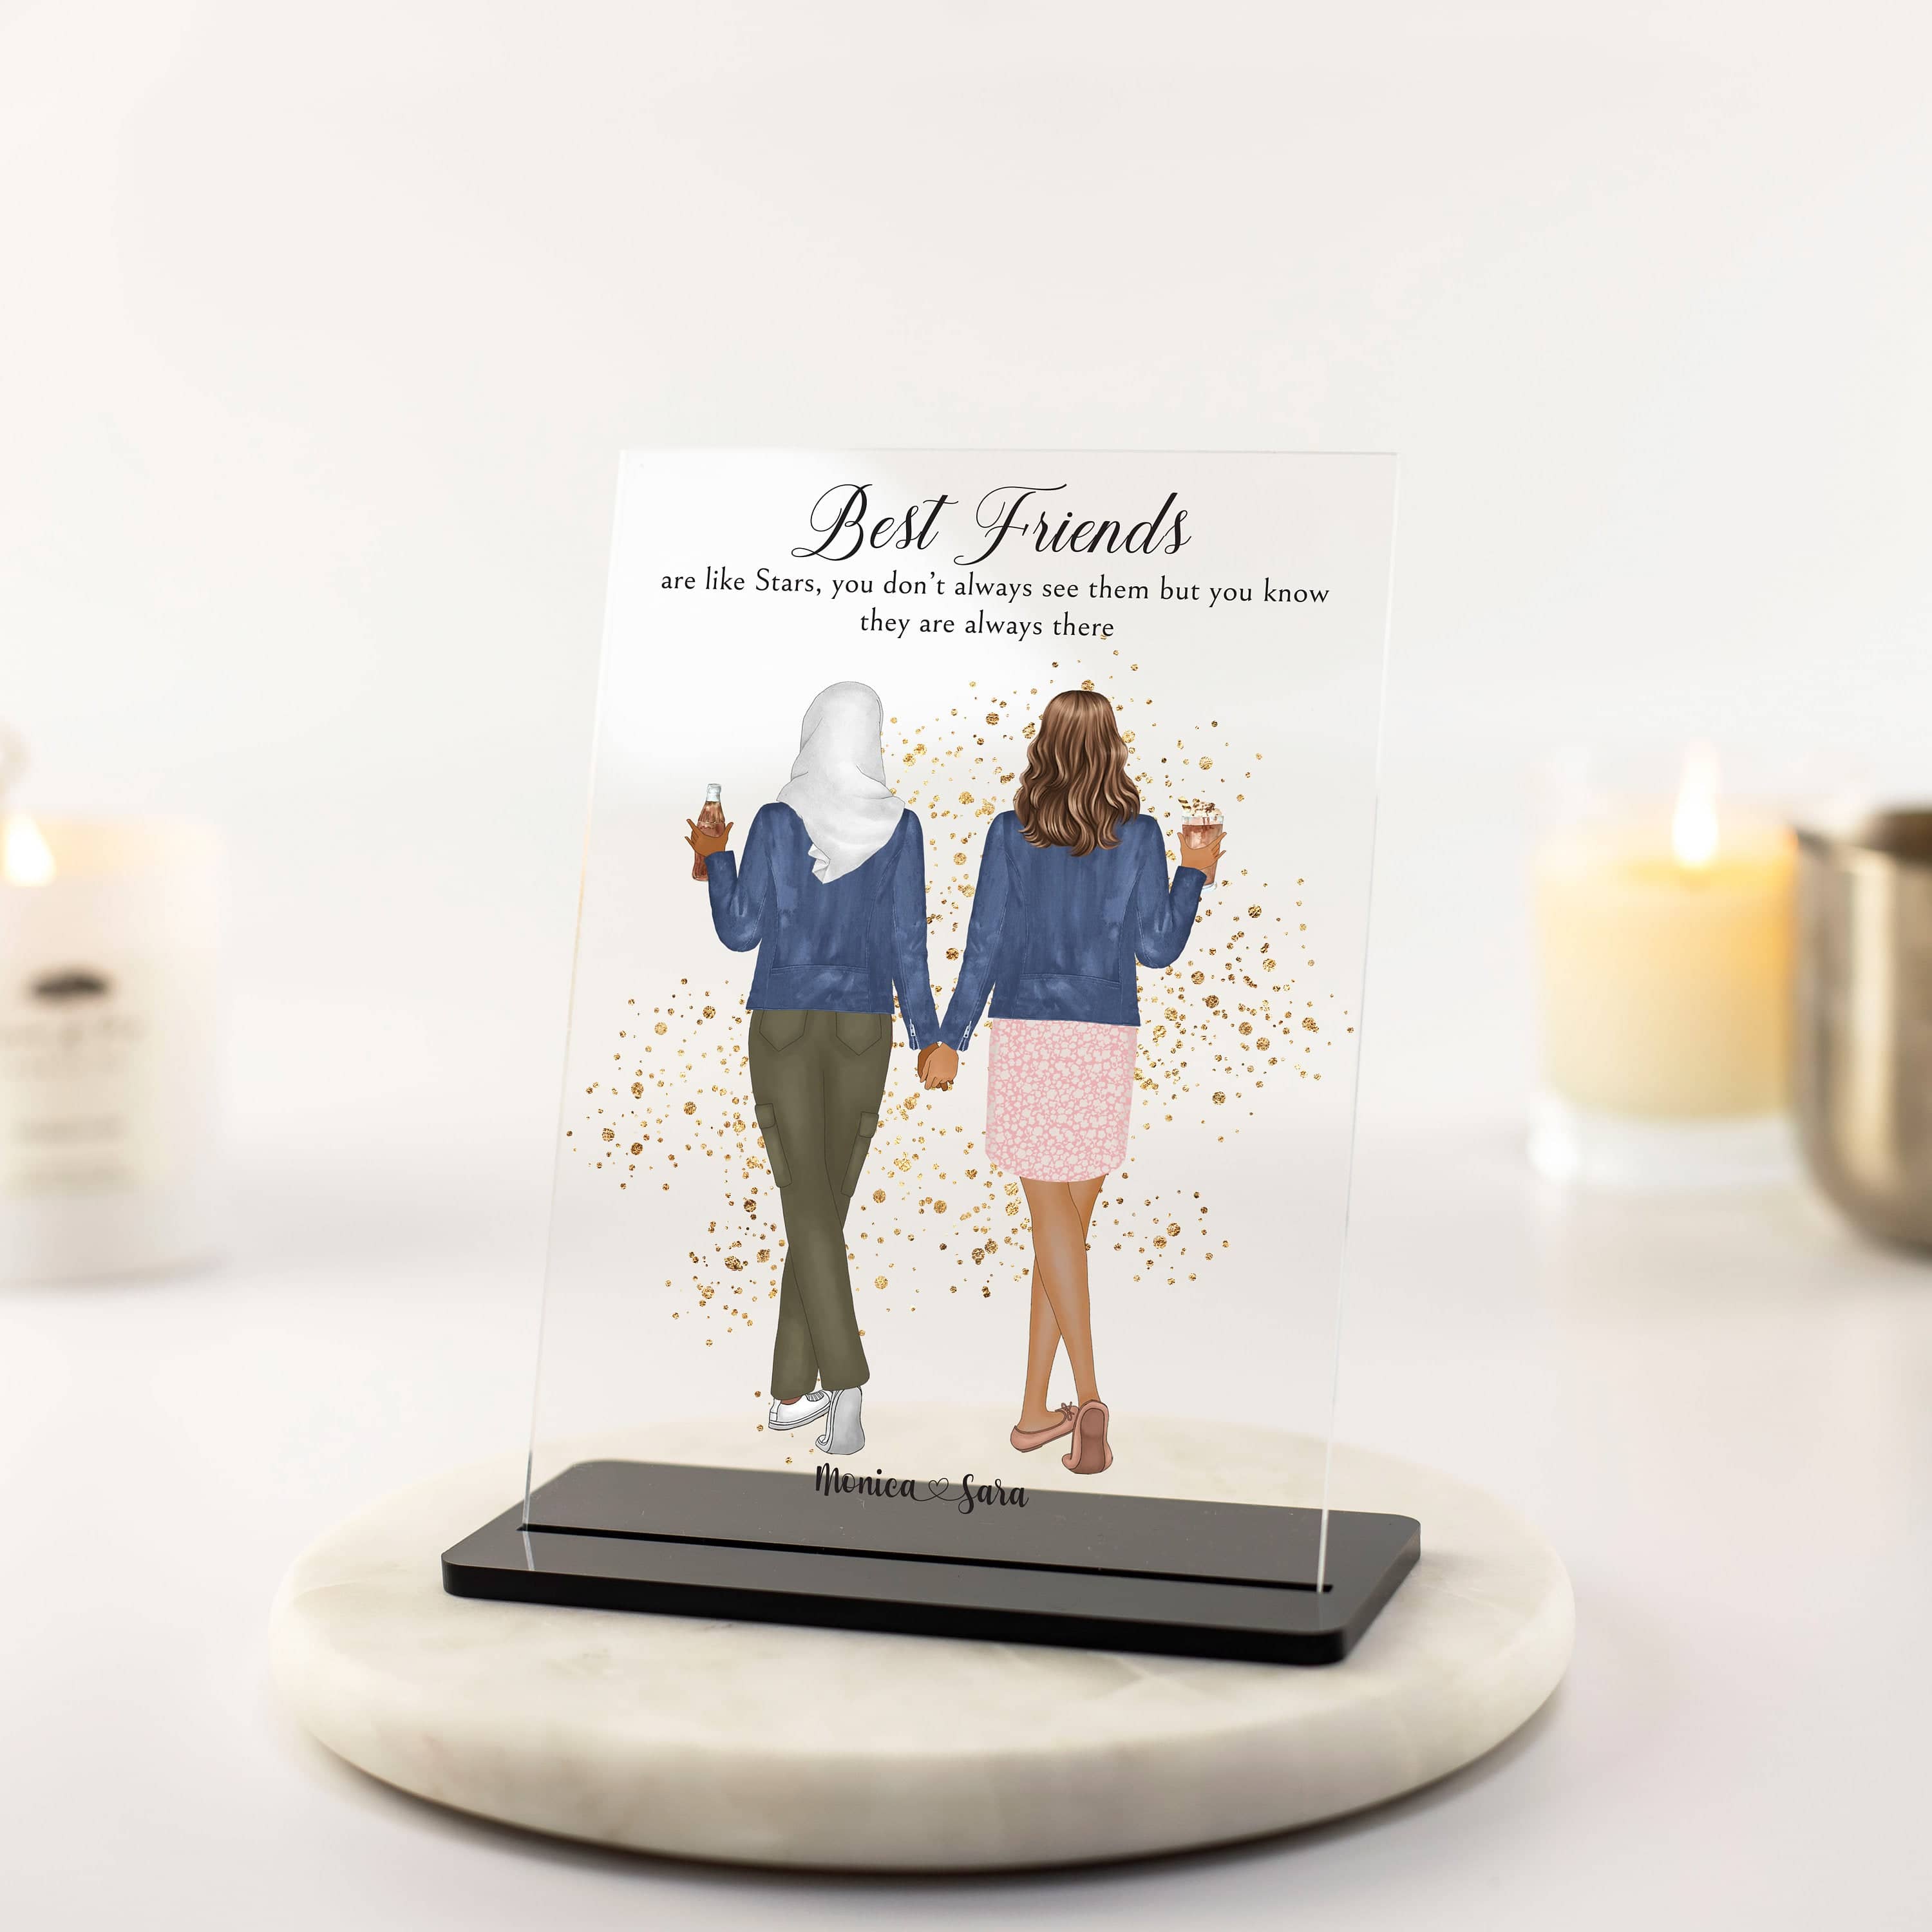 Best Friend Gifts, Best Friend Print, Personalised Gift for Her, Best Friend Birthday, Friendship, Friends Picture, Clear Acrylic Plaque